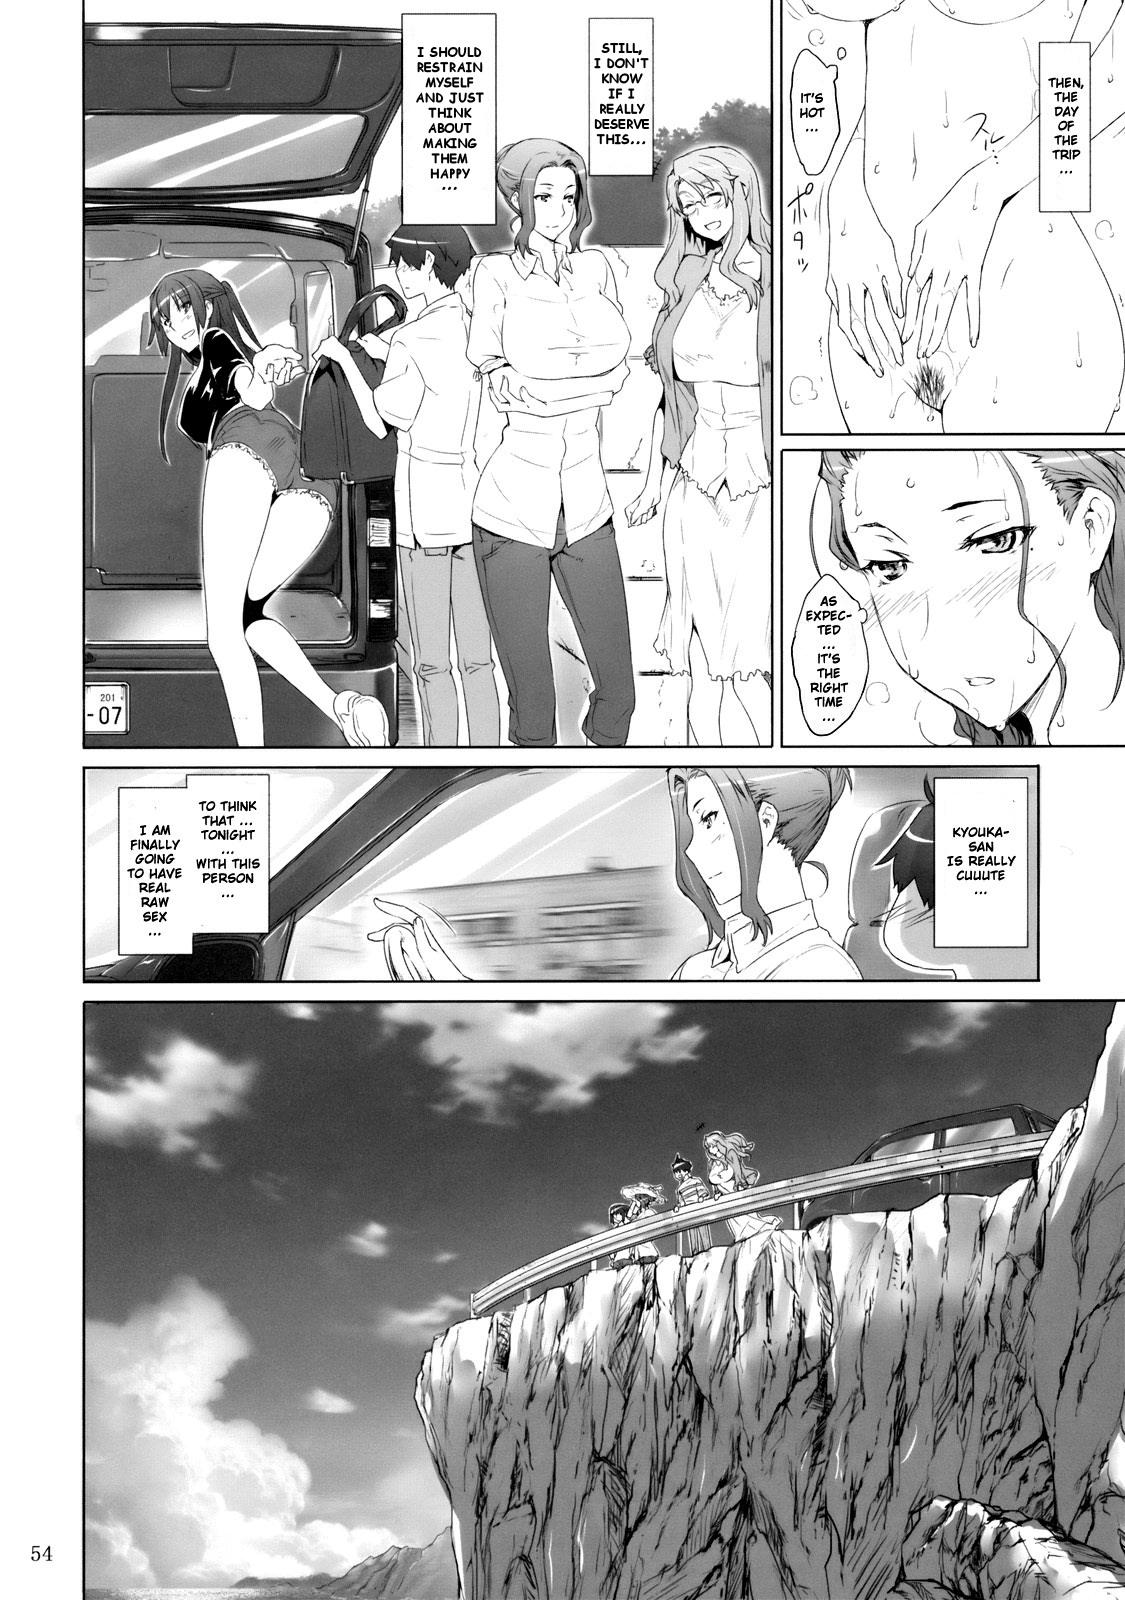 Stepson Mtsp - Tachibana-san's Circumstabces WIth a Man 2 Nut - Page 3